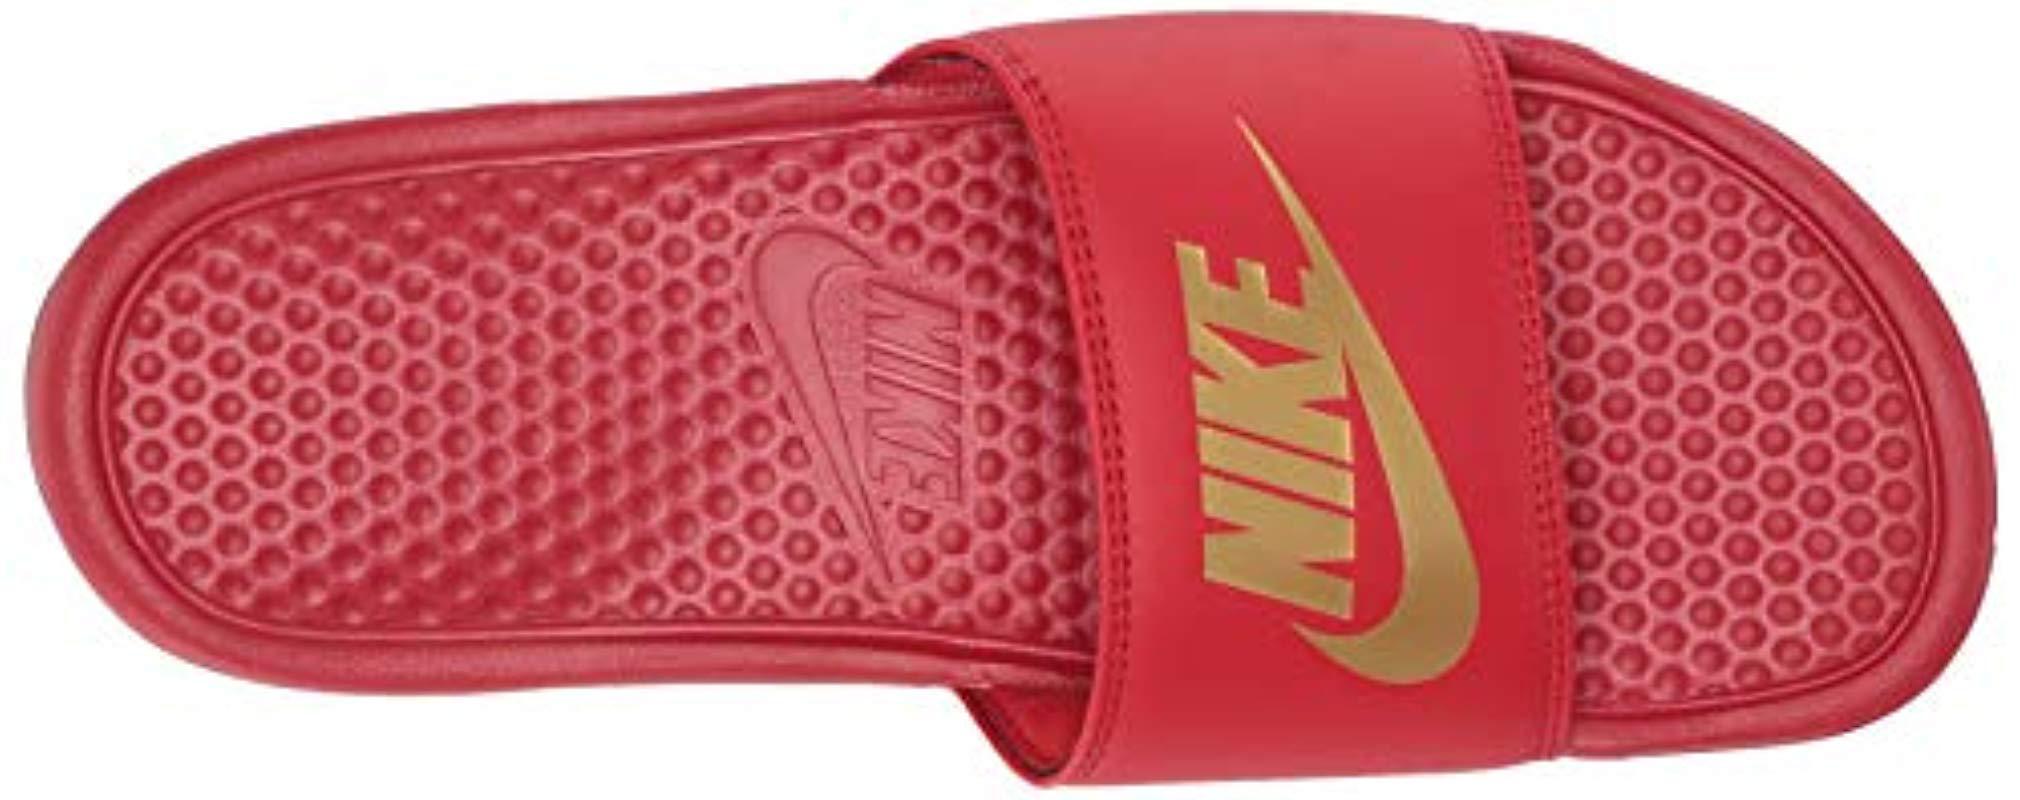 Nike Synthetic Benassi Just Do It Athletic Sandal in University Red/Metallic  Silver (Red) for Men | Lyst